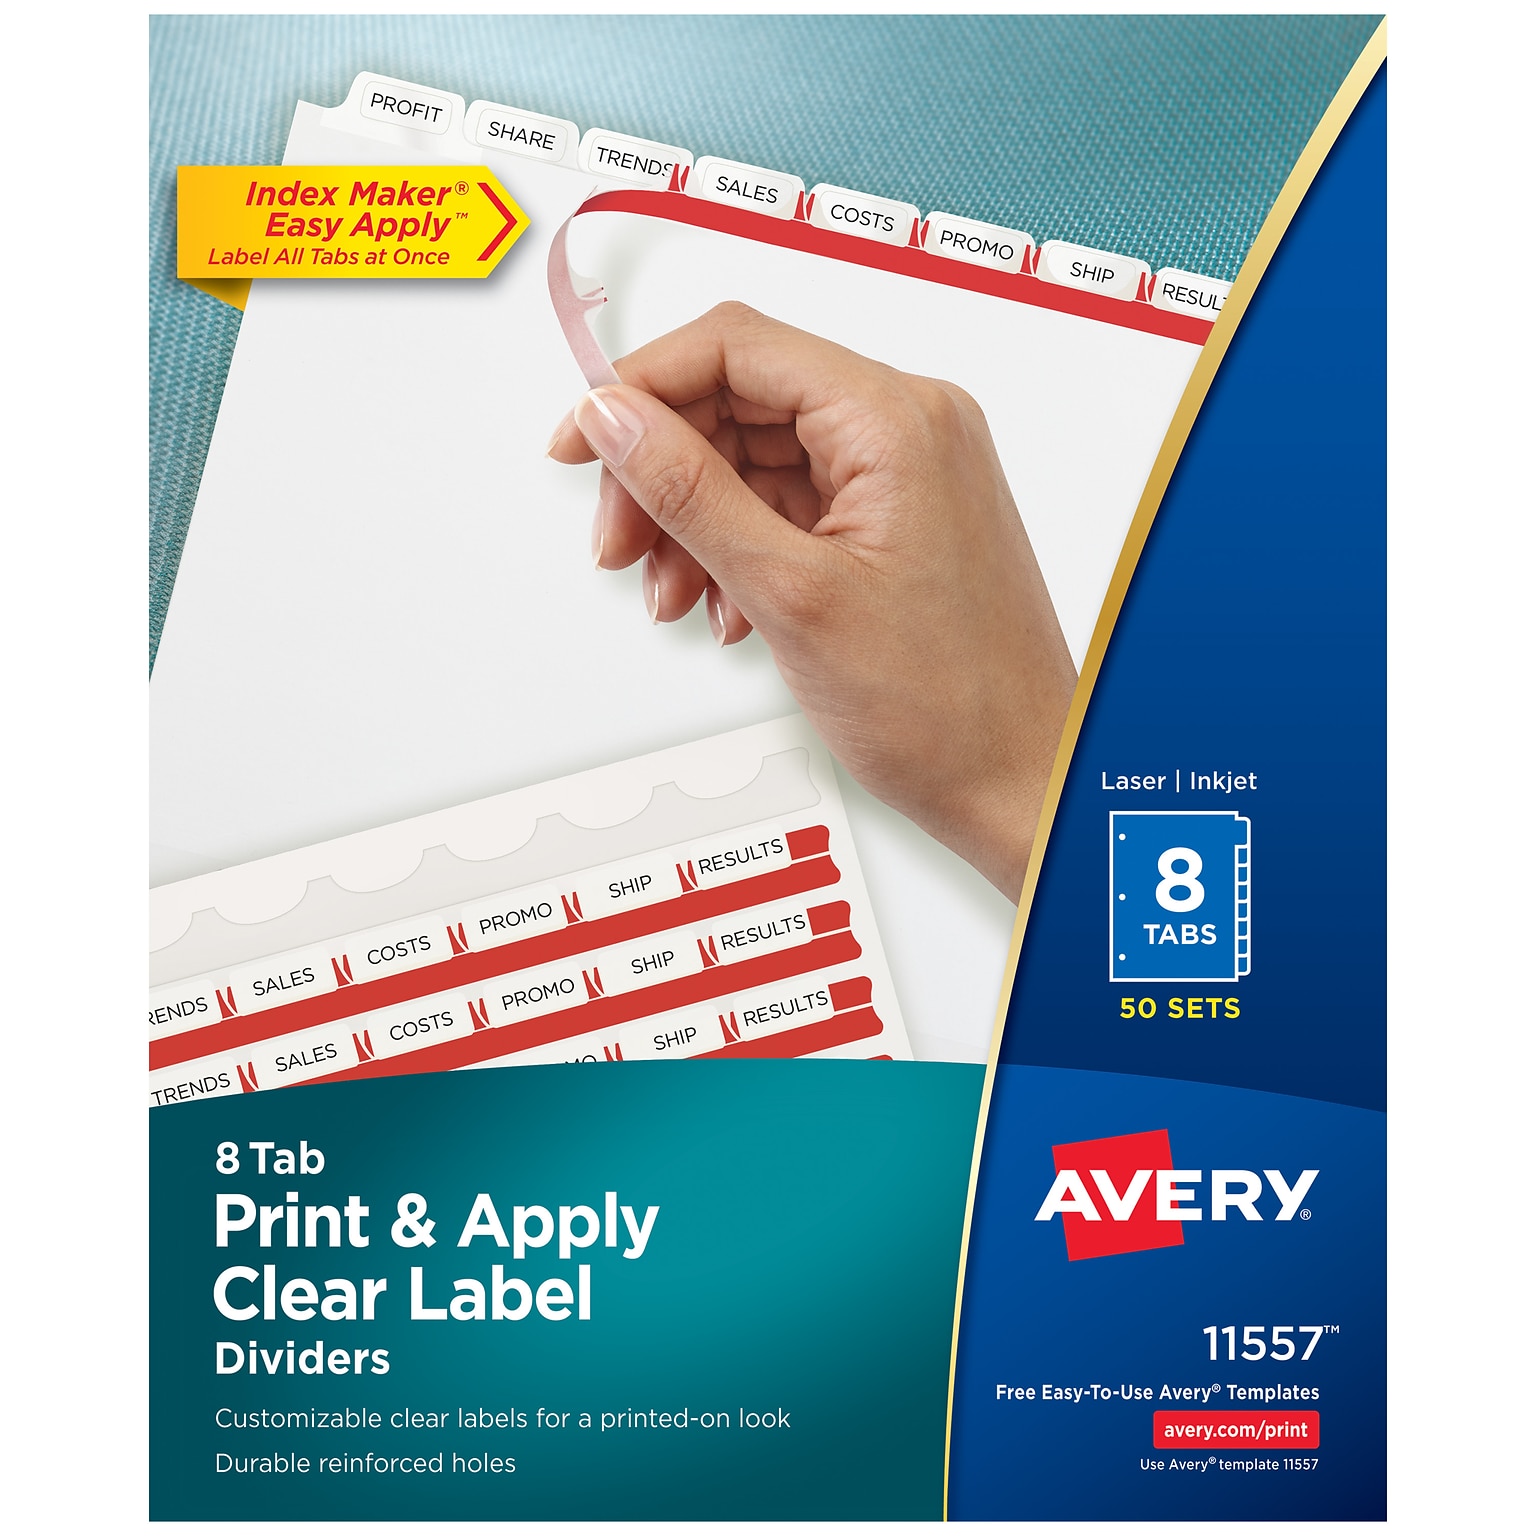 Avery Index Maker Paper Dividers with Print & Apply Label Sheets, 8 Tabs, White, 50 Sets/Pack (11557)